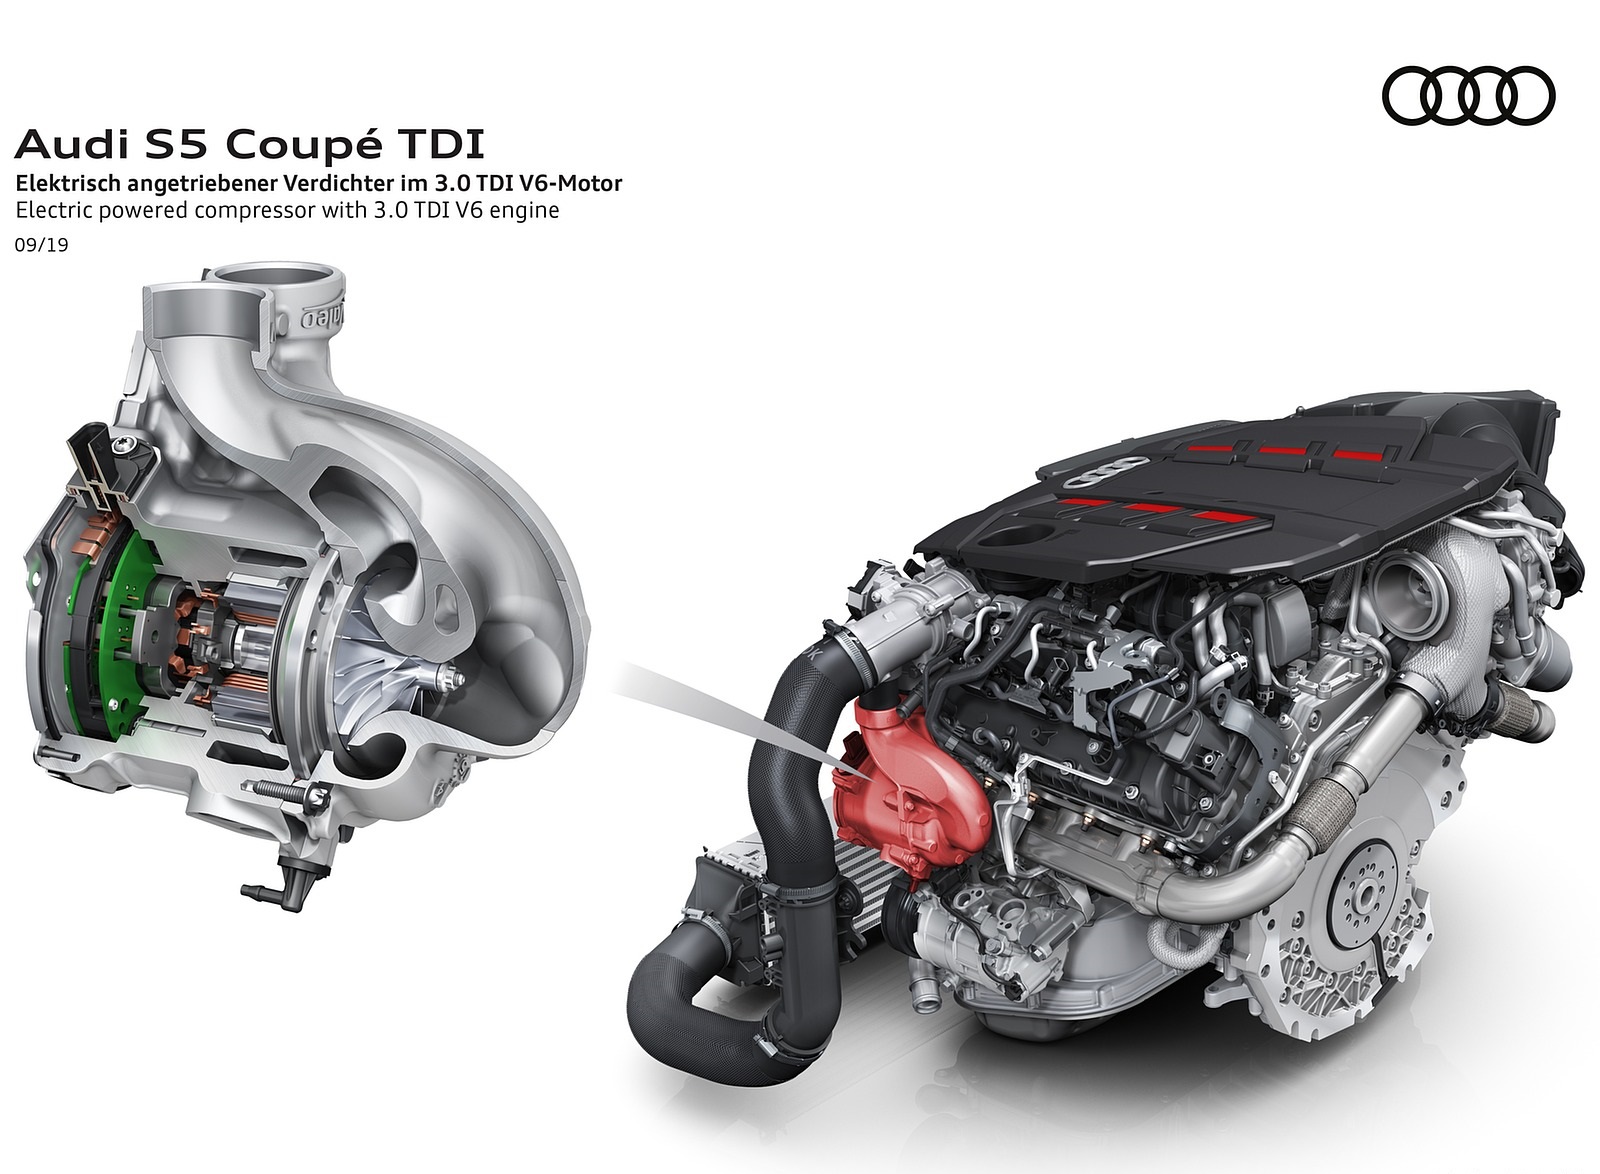 2020 Audi S5 Coupe TDI Electric powered compressor with 3.0 TDI V6 engine Wallpapers #16 of 18